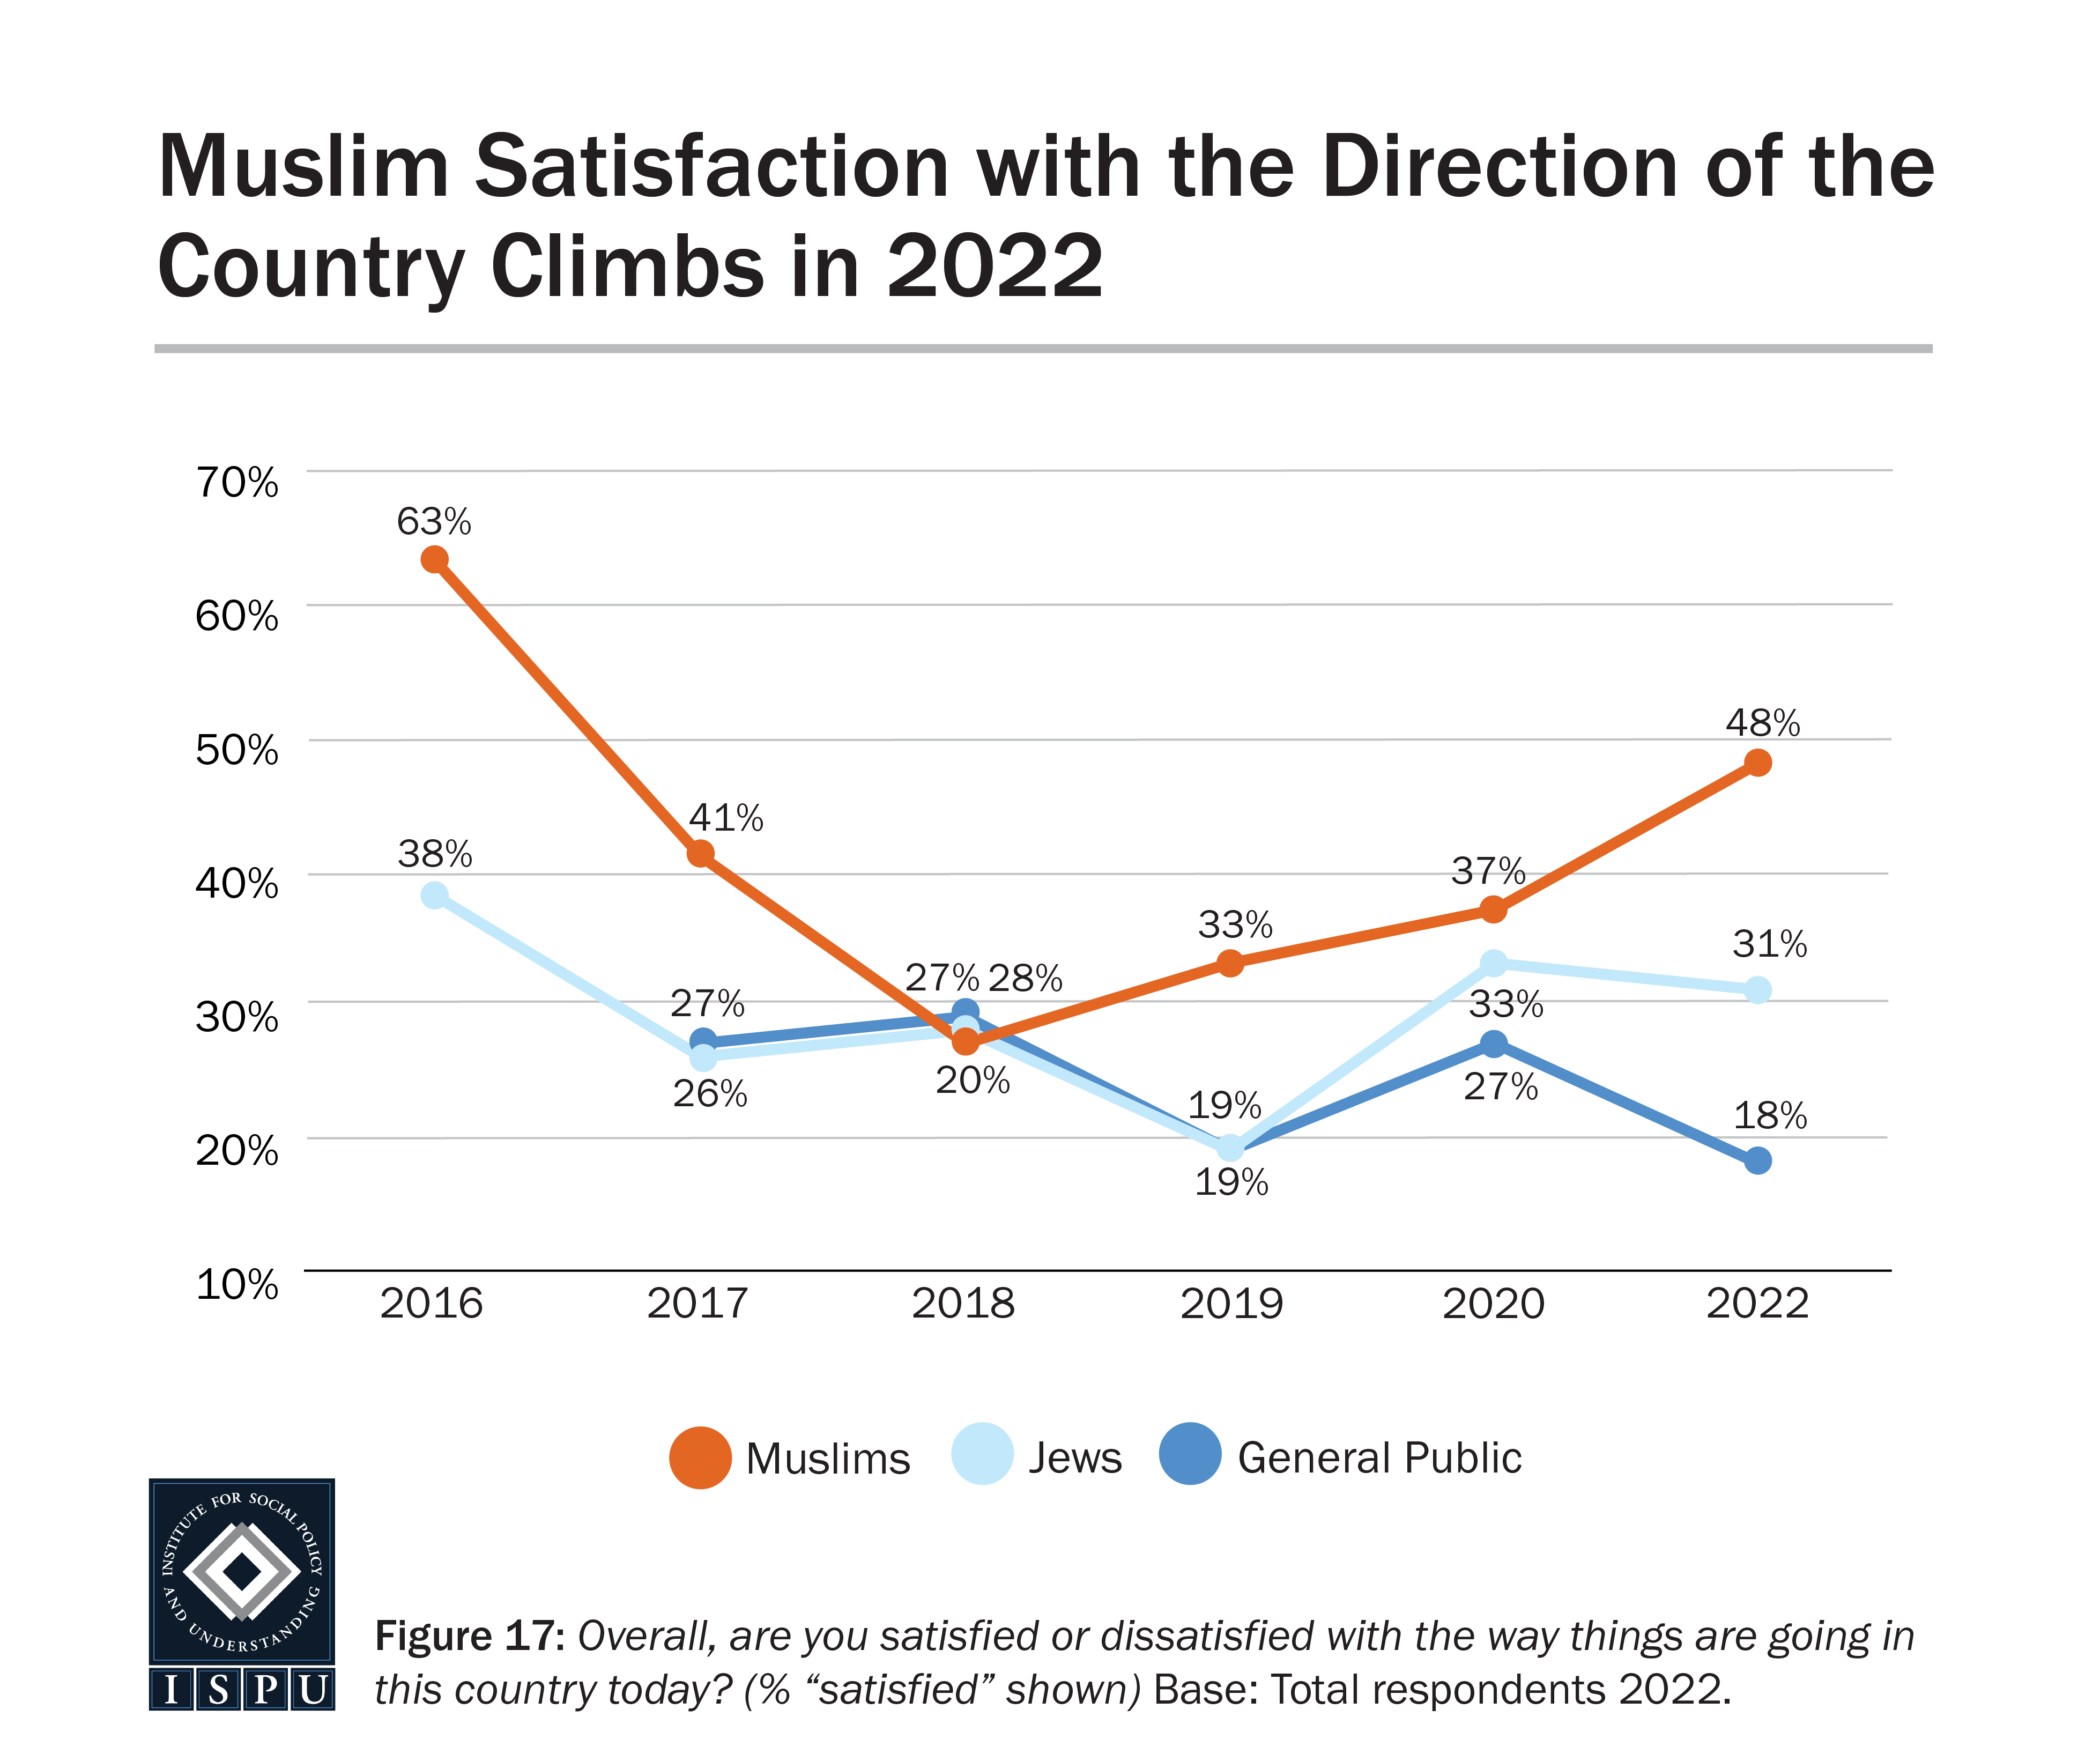 A line graph showing the proportion of Muslims, Jews, and the general public who report being satisfied with the direction of the country from 2016 - 2022.